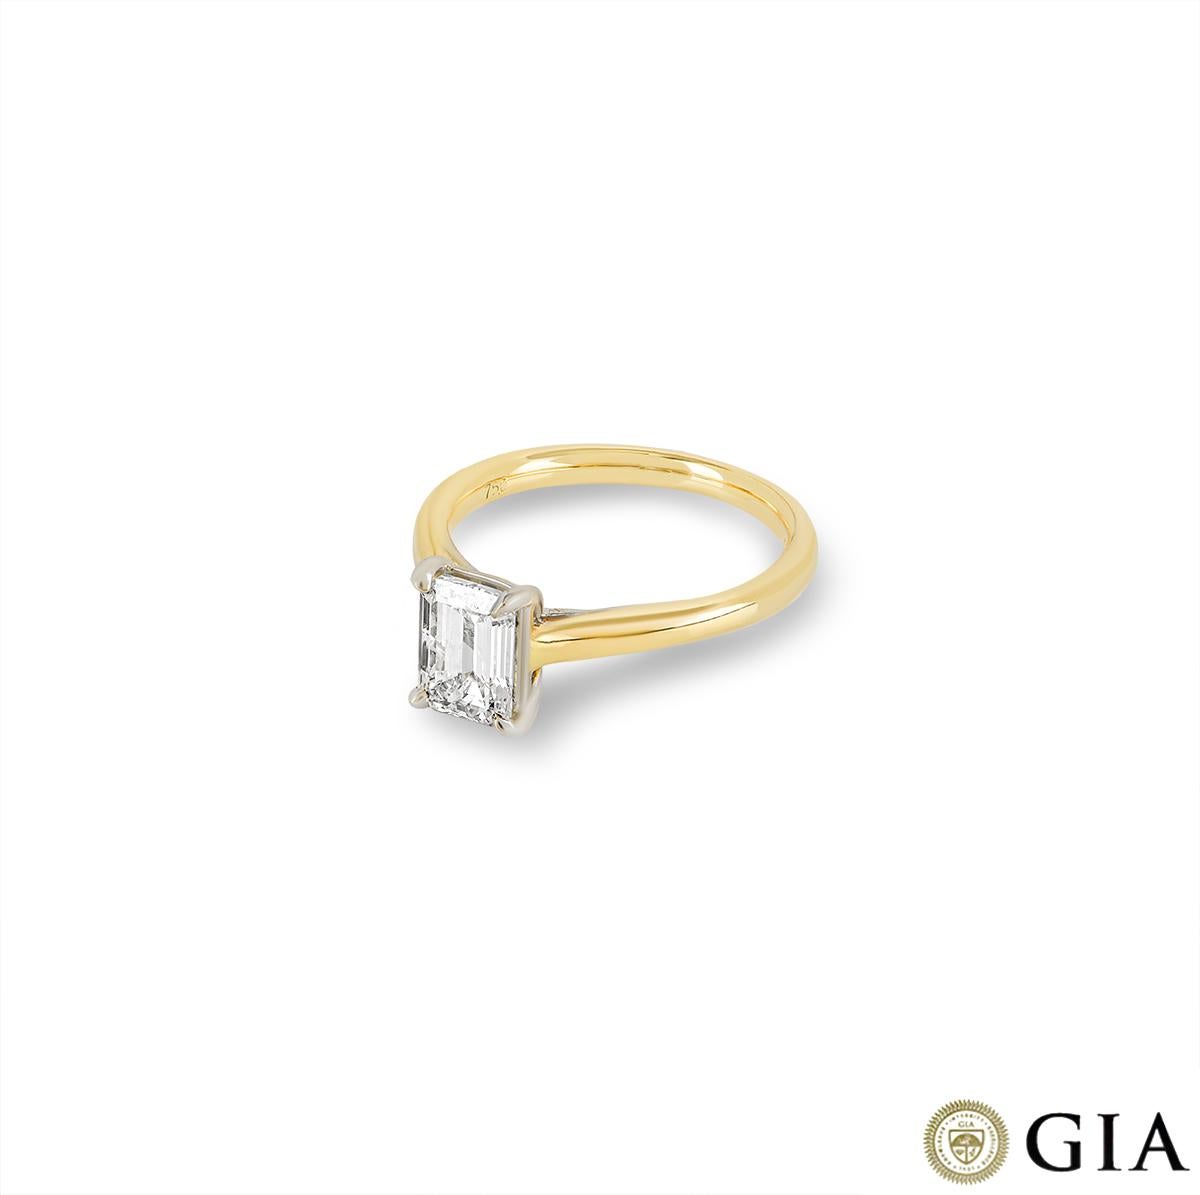 Women's GIA Cert Yellow Gold Emerald Cut Diamond Solitaire Engagement Ring 1.31 Carat For Sale